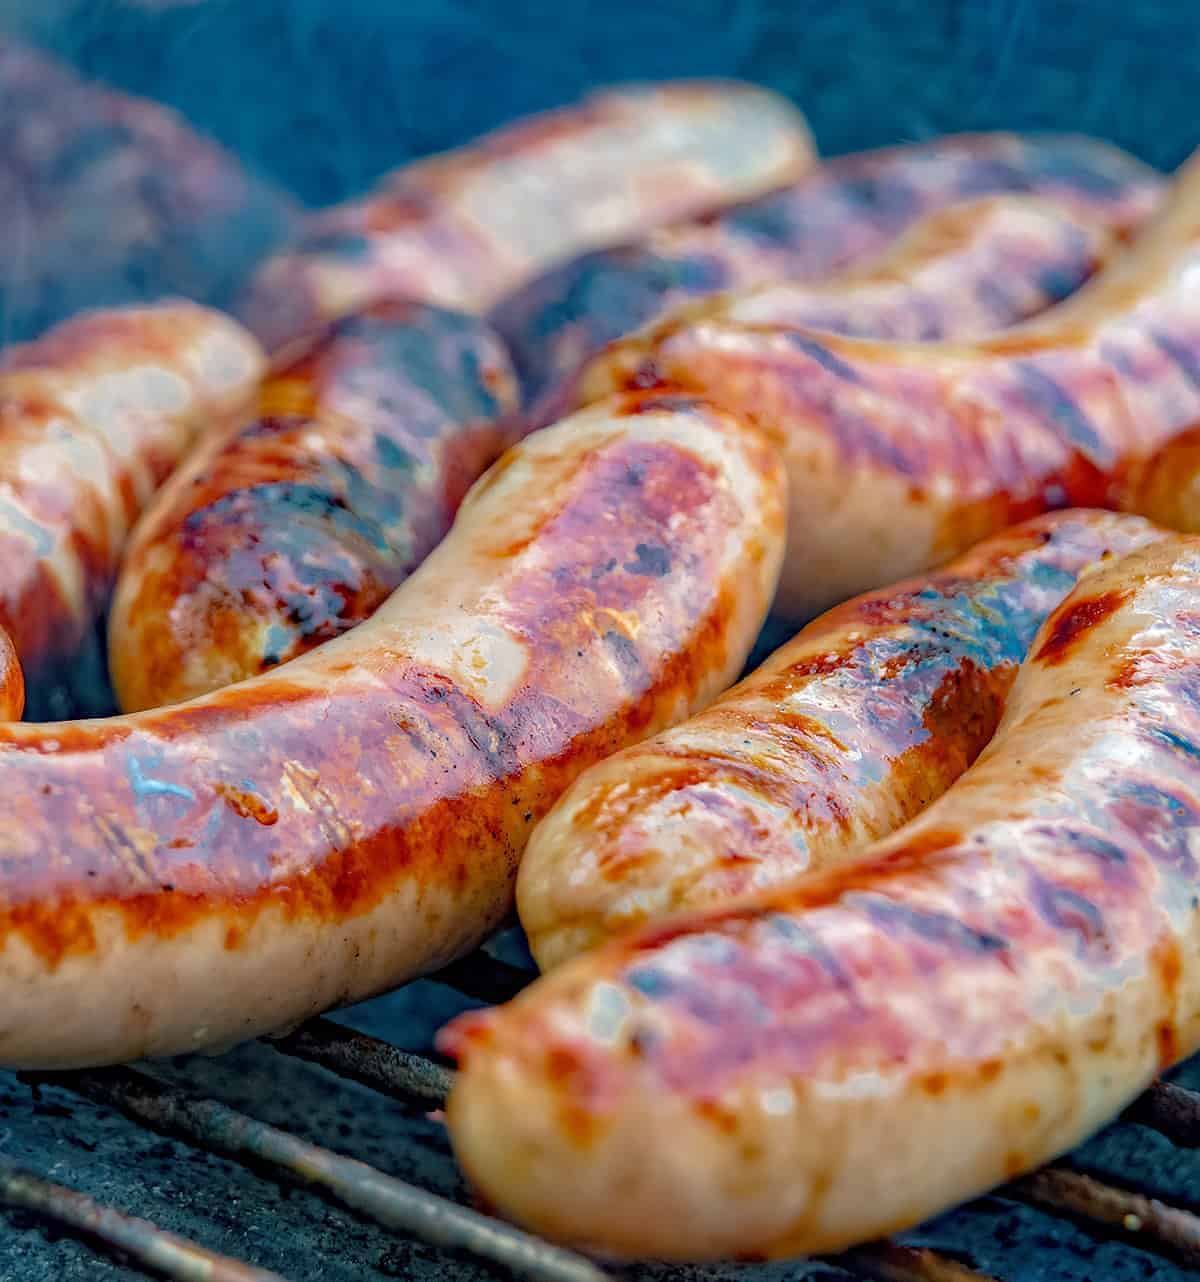 How Long to Grill Brats after Boiling?